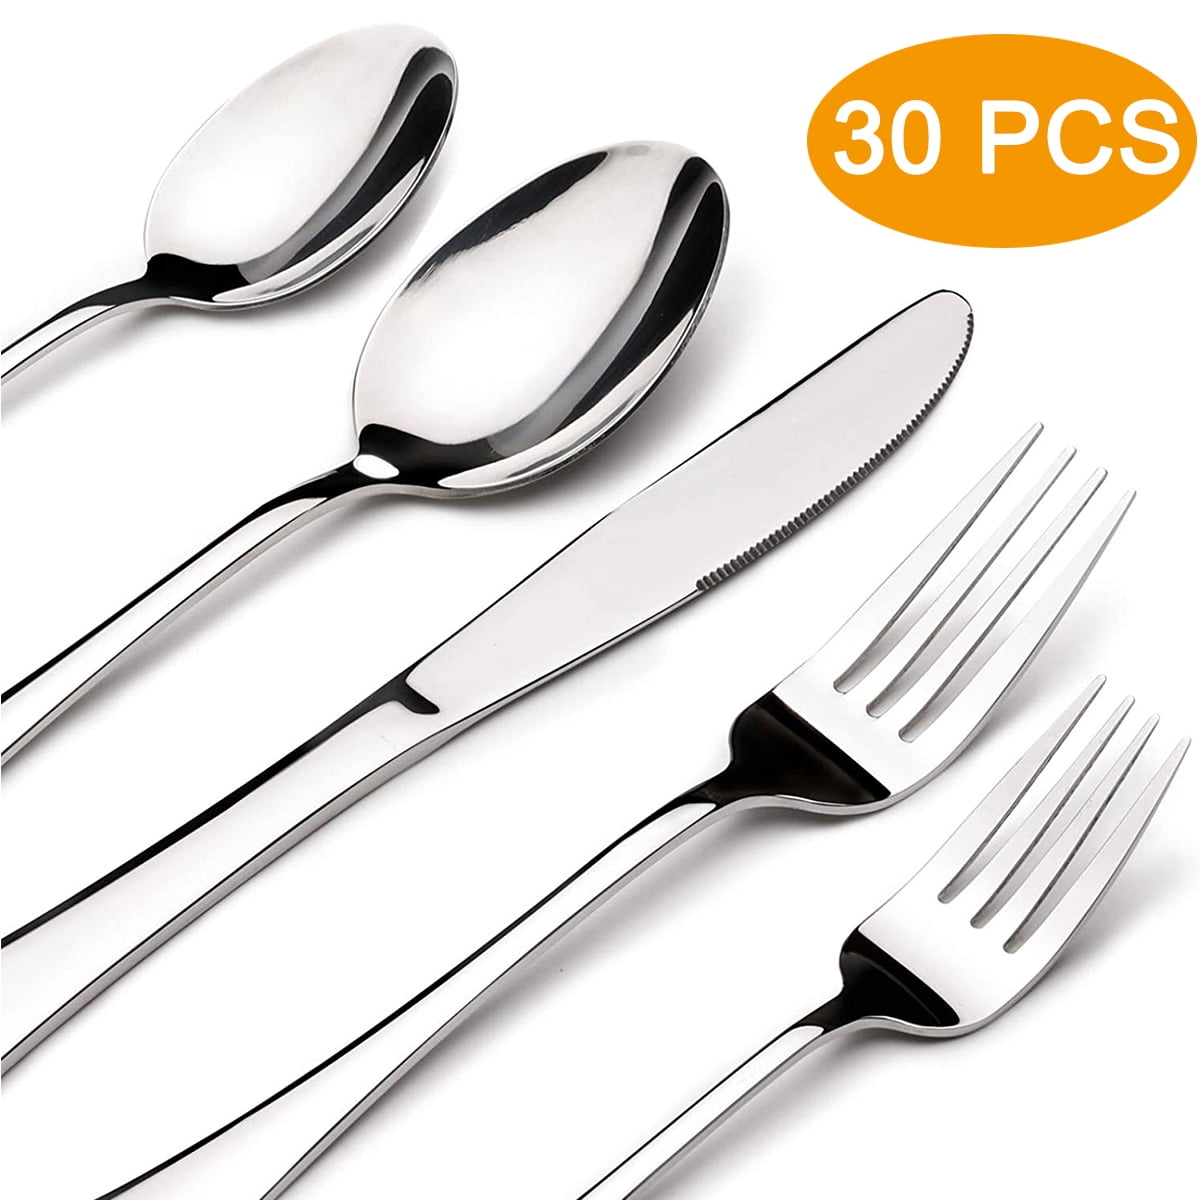 Easy to Clean & Dishwasher Safe Kitchen or Restaurant E-far 6.7 Inch Stainless Steel Dessert Forks for Home Non-toxic & Mirror Polished Salad Forks Set of 12 